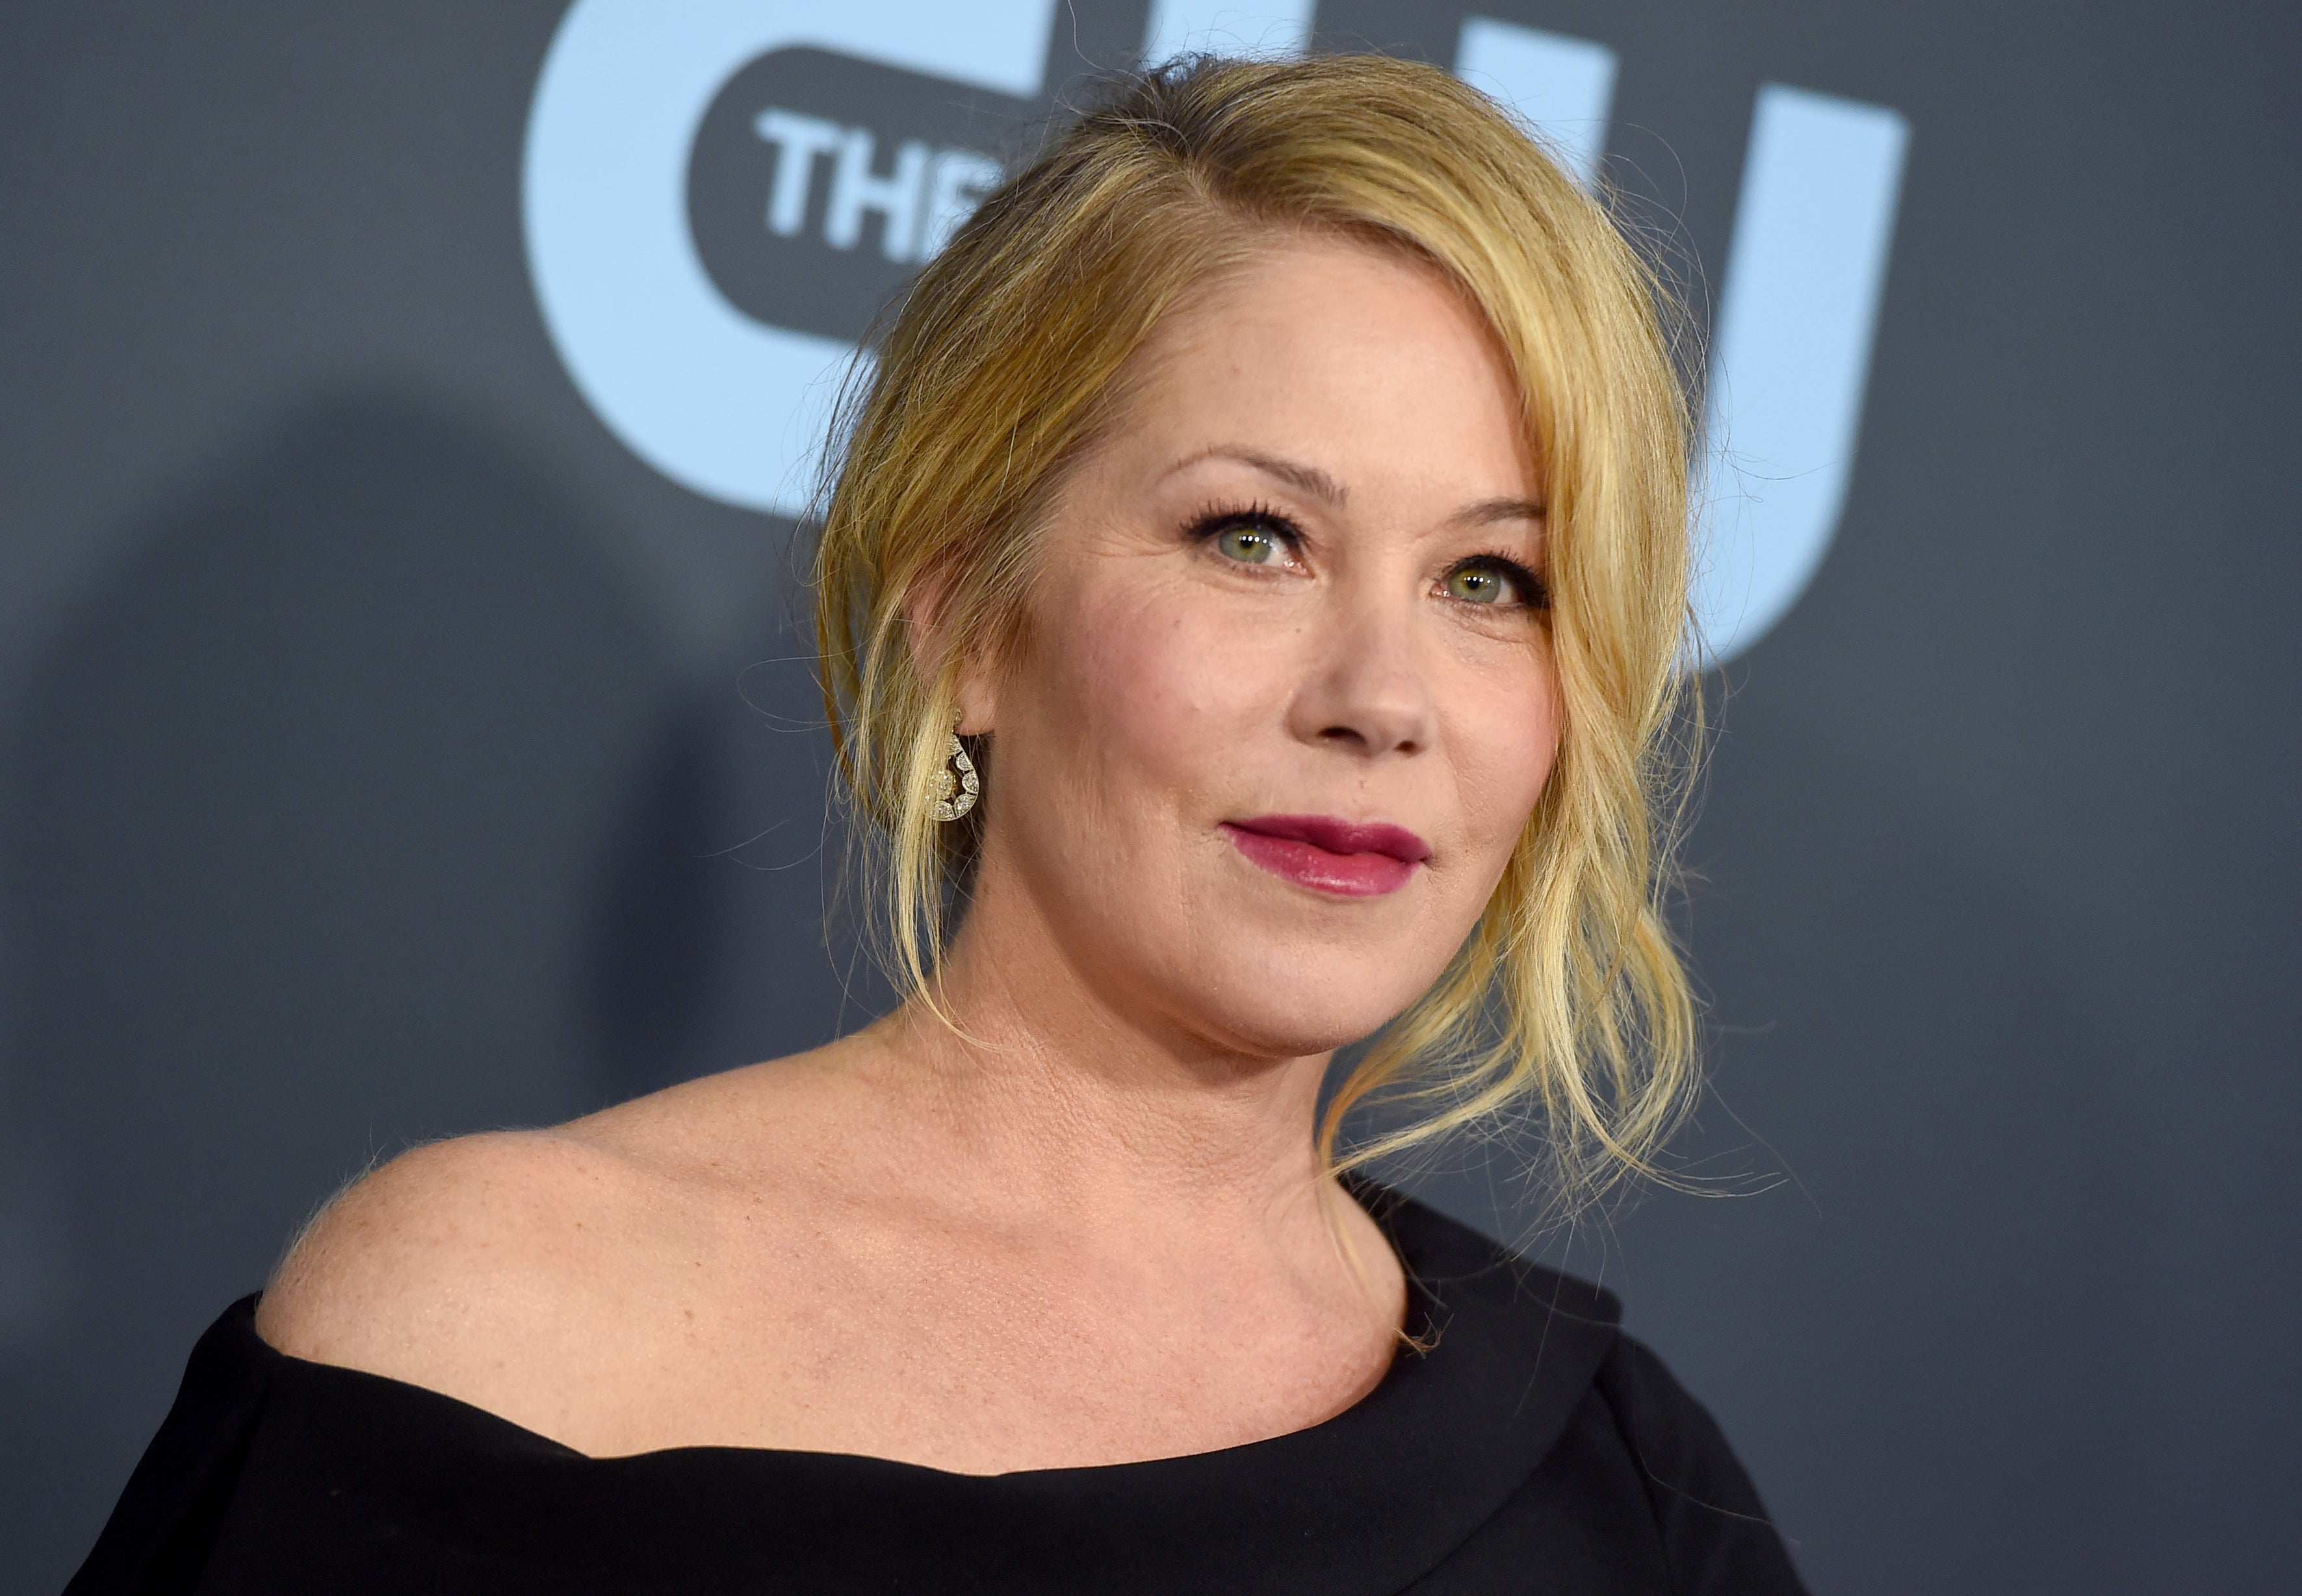 Actress Christina Applegate recently revealed she has been diagnosed with multiple sclerosis